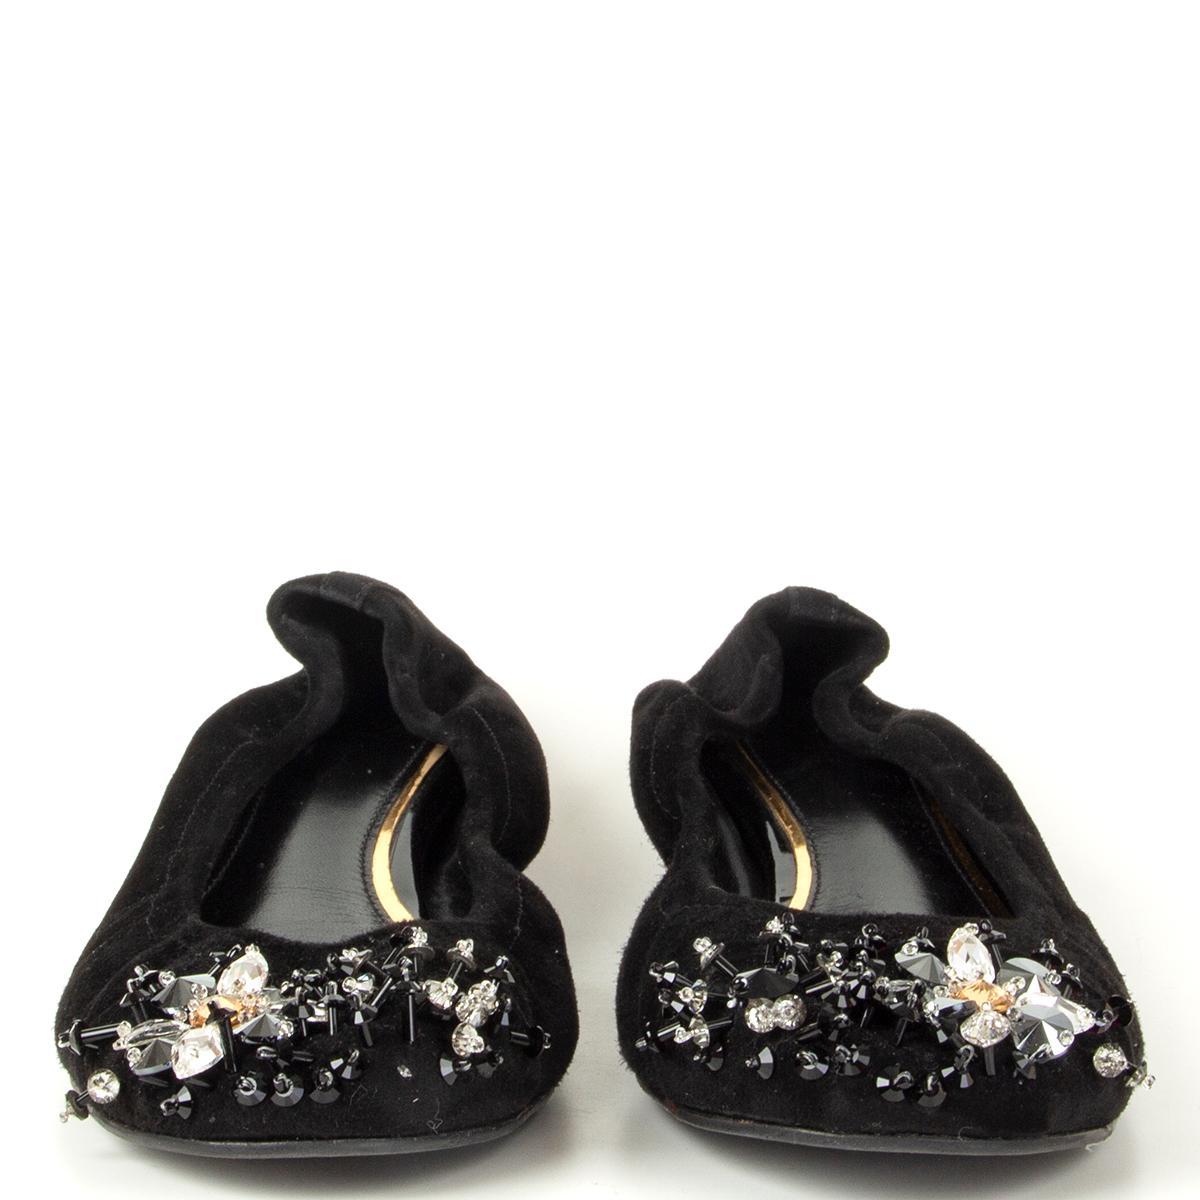 100% authentic Lanvin ballet flats in black suede featuring crystal embellished cap. Have been worn and are in excellent condition. 

Measurements
Imprinted Size	37
Shoe Size	37
Inside Sole	24cm (9.4in)
Width	7.5cm (2.9in)

All our listings include